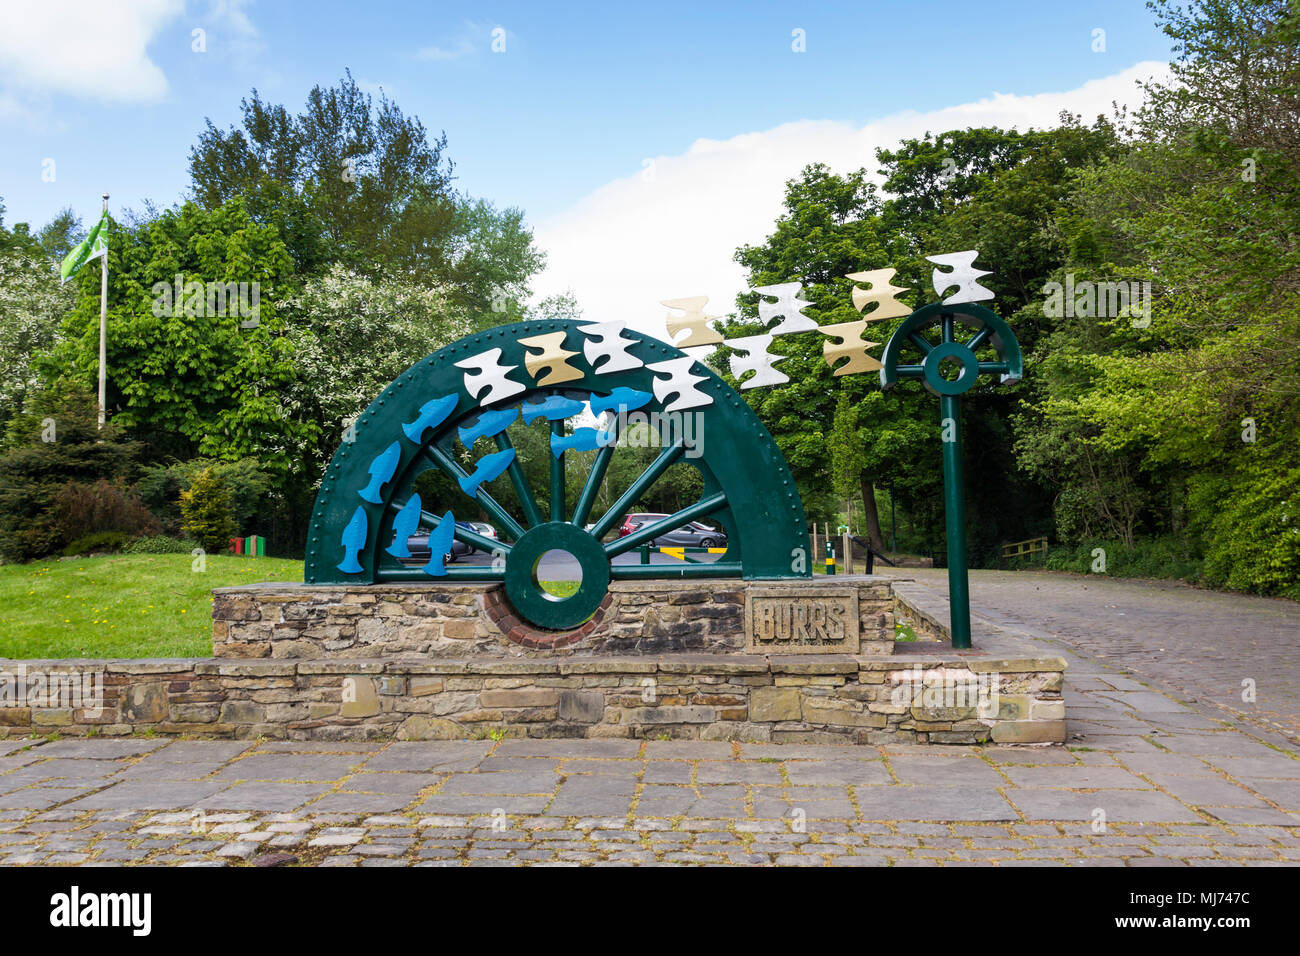 Waterwheel sculpture by David Kemp at the entrance to Burrs Country Park, Bury, installed in 1996. The Waterwheel was commissioned by Bury Council. Stock Photo